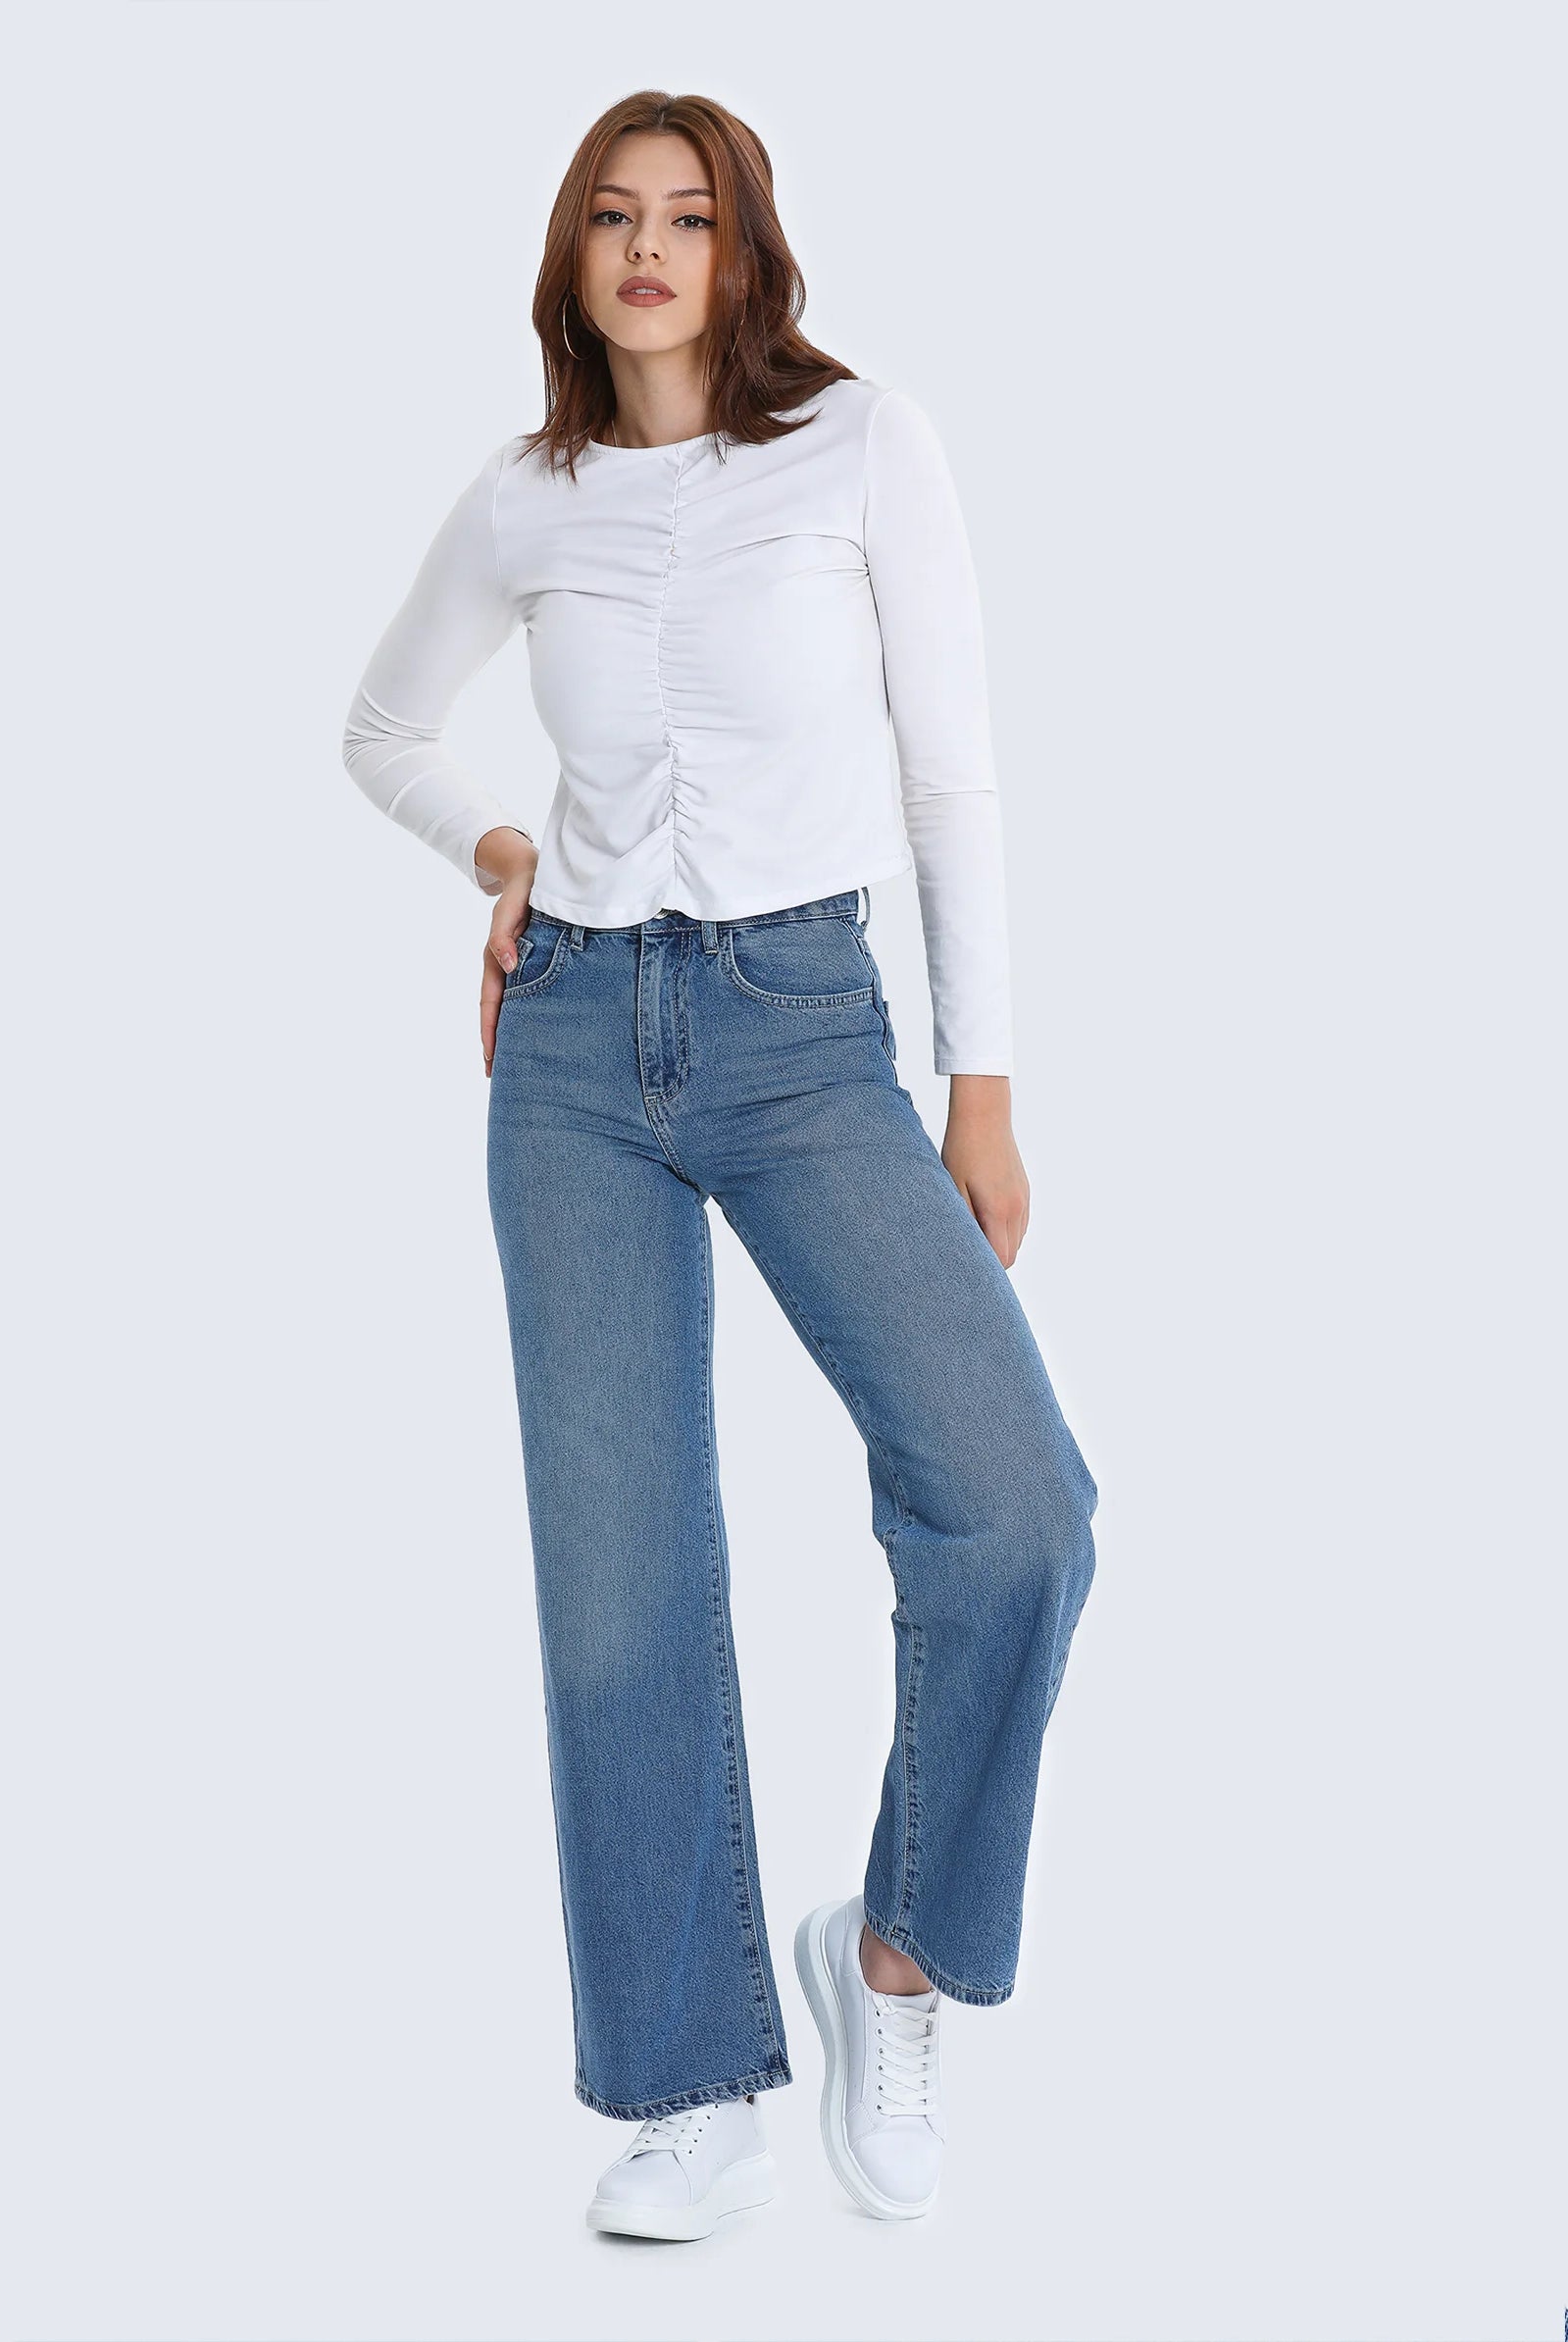 best jeans for hourglass